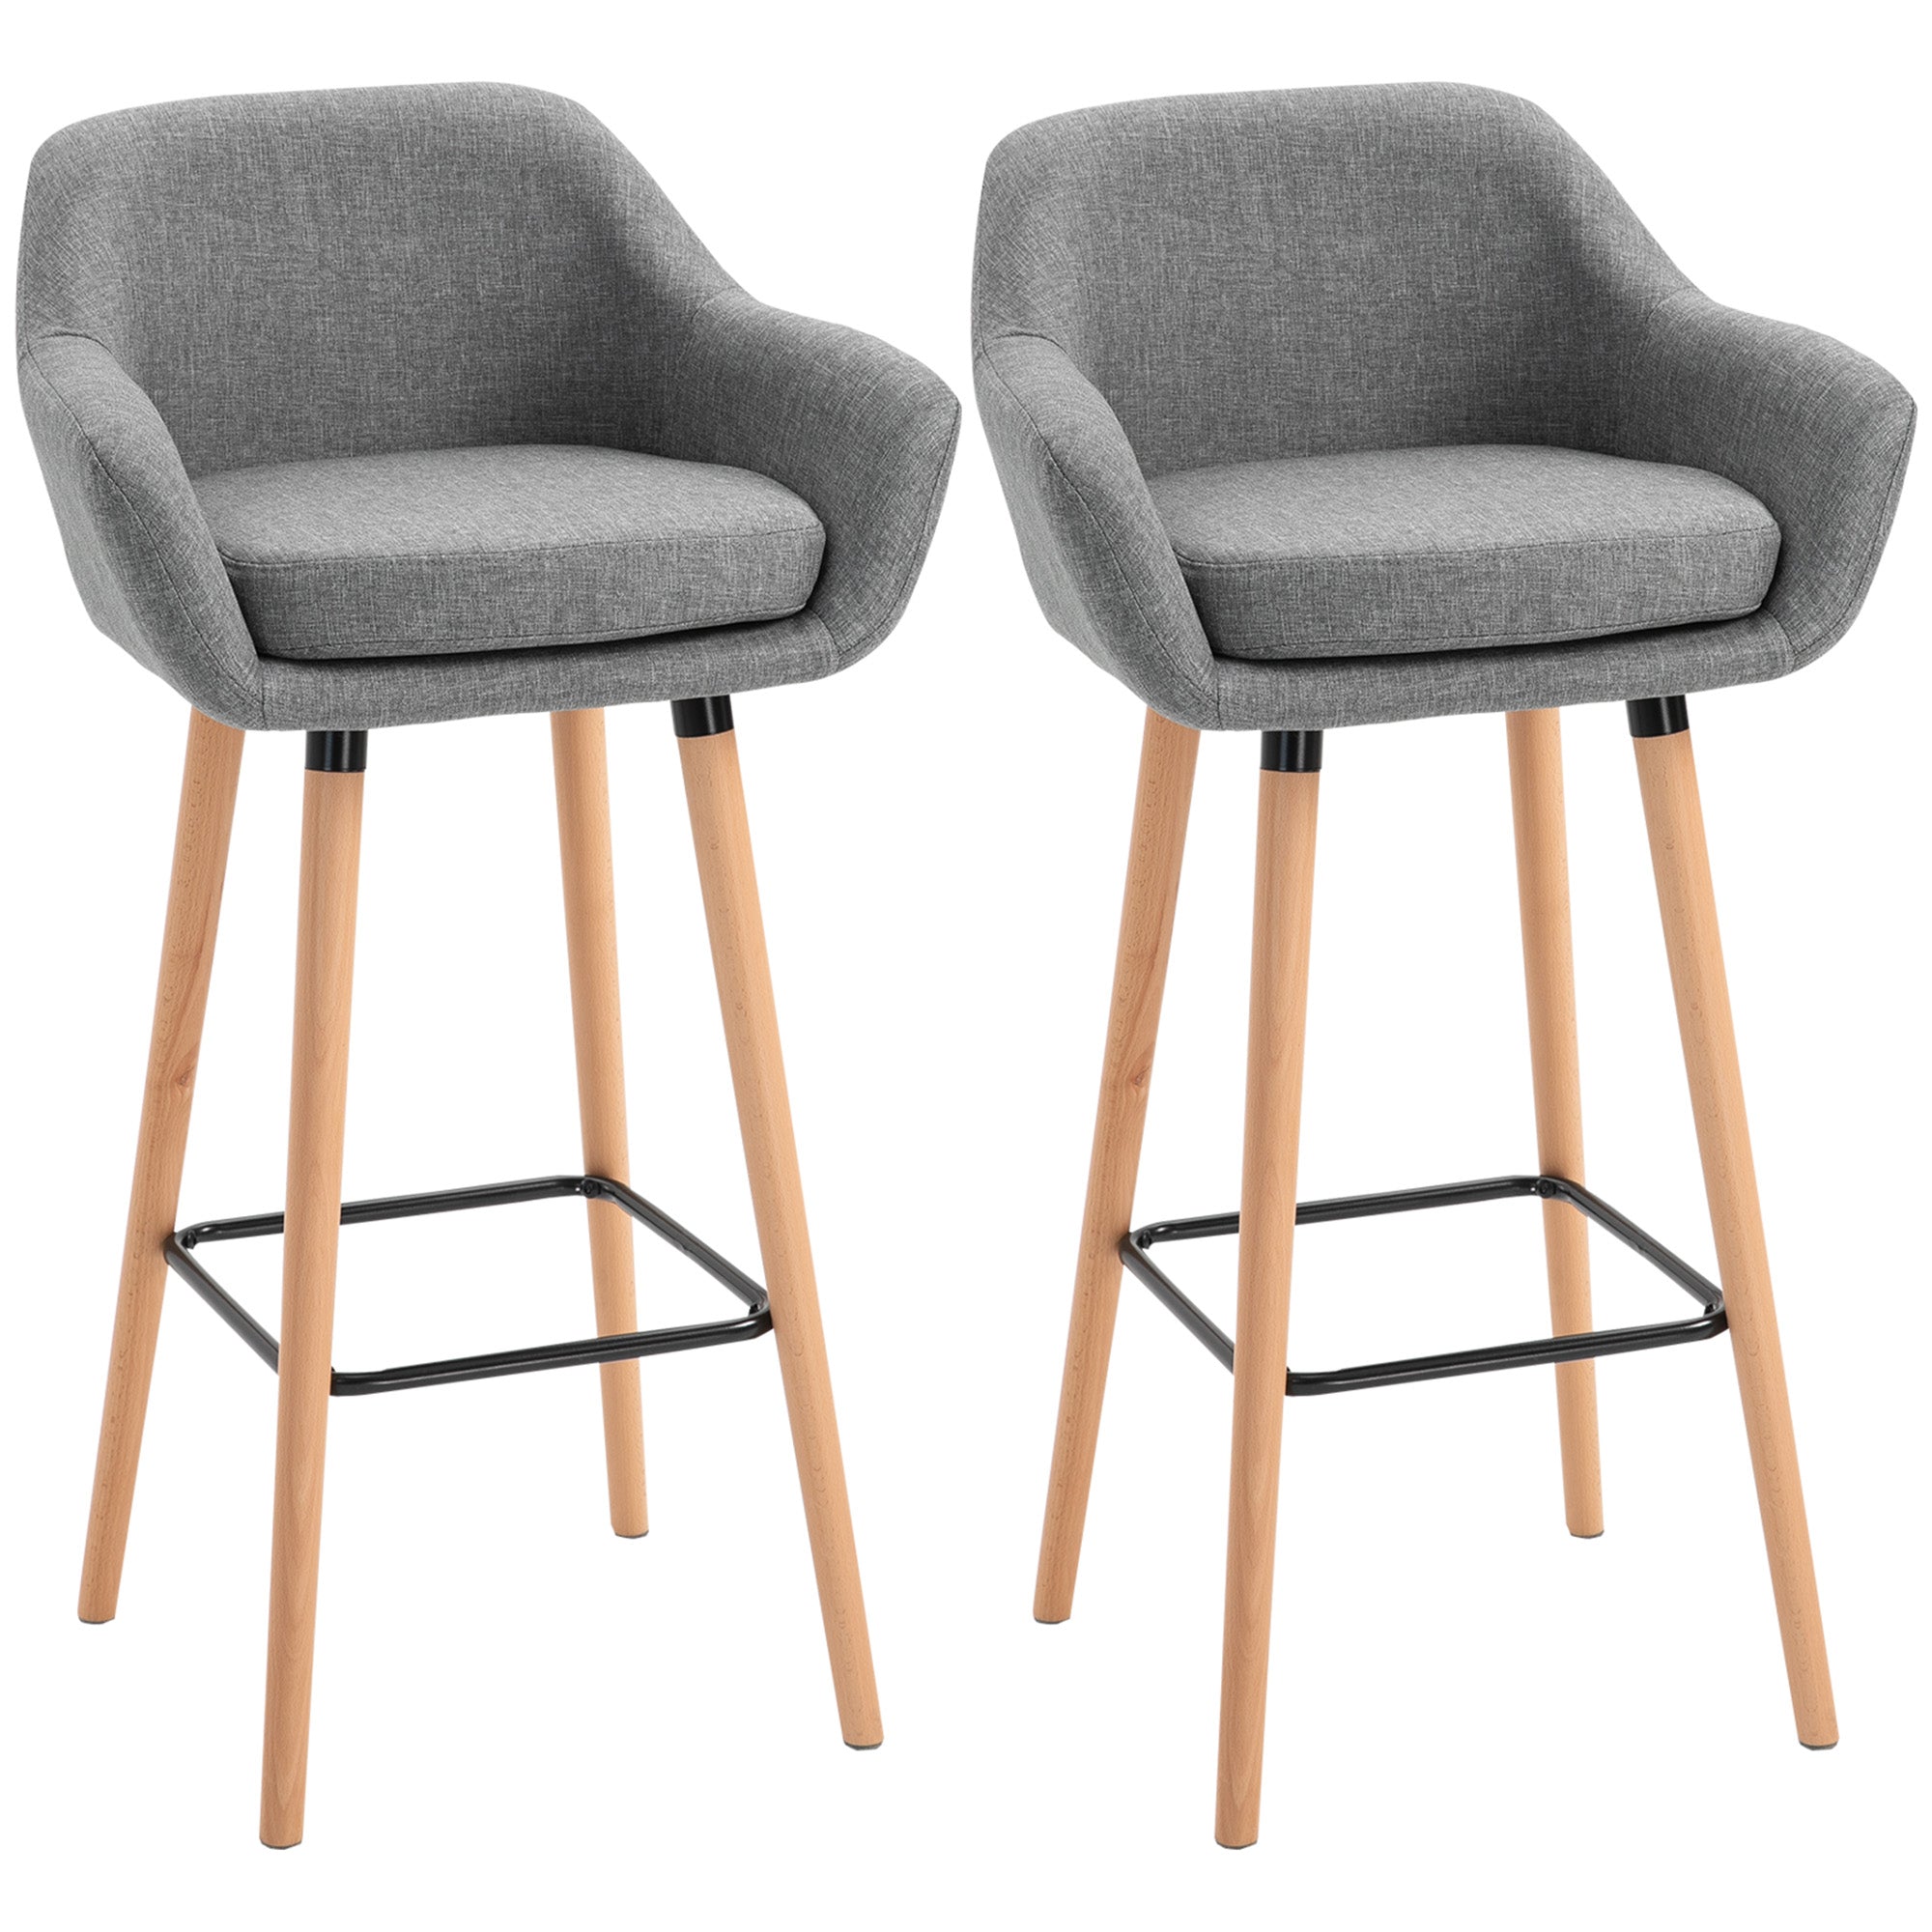 Set of 2 Bar Stools Modern Upholstered Seat Bar Chairs w/ Metal Frame, Solid Wood Legs Living Room Dining Room Fabric Furniture - Grey  AOSOM   